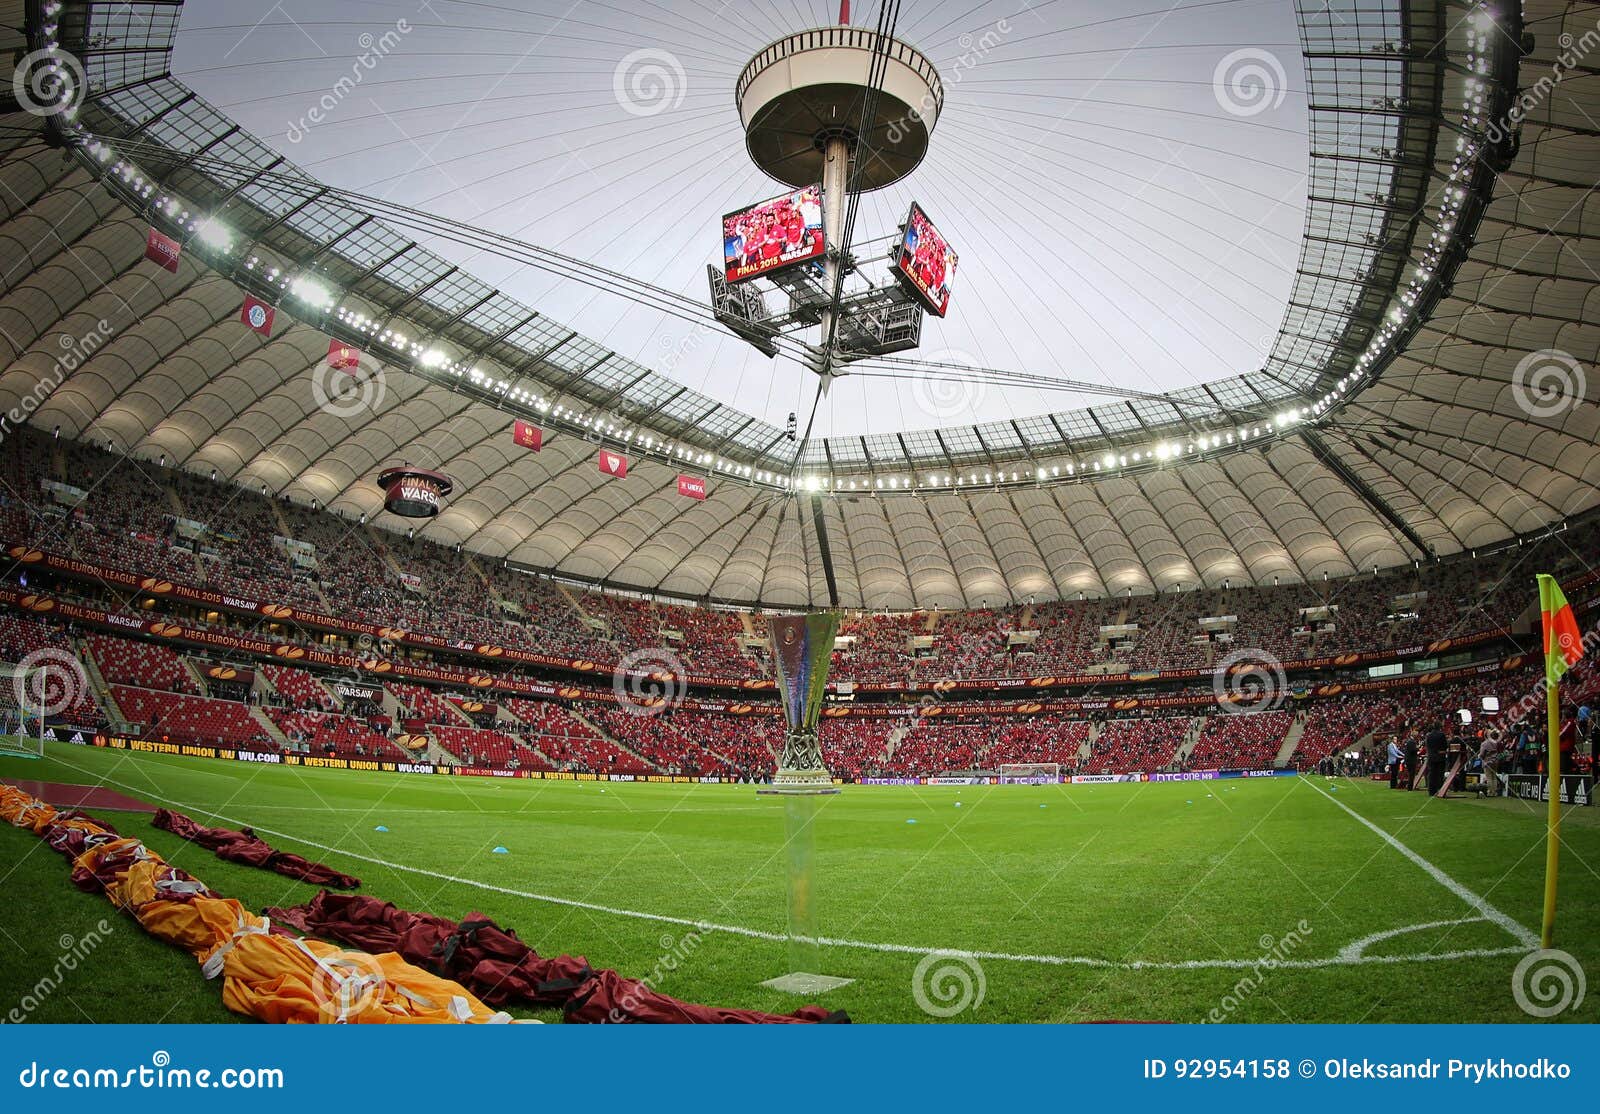 UEFA Europe Laegue Trophy Cup Editorial Stock Photo - Image of award